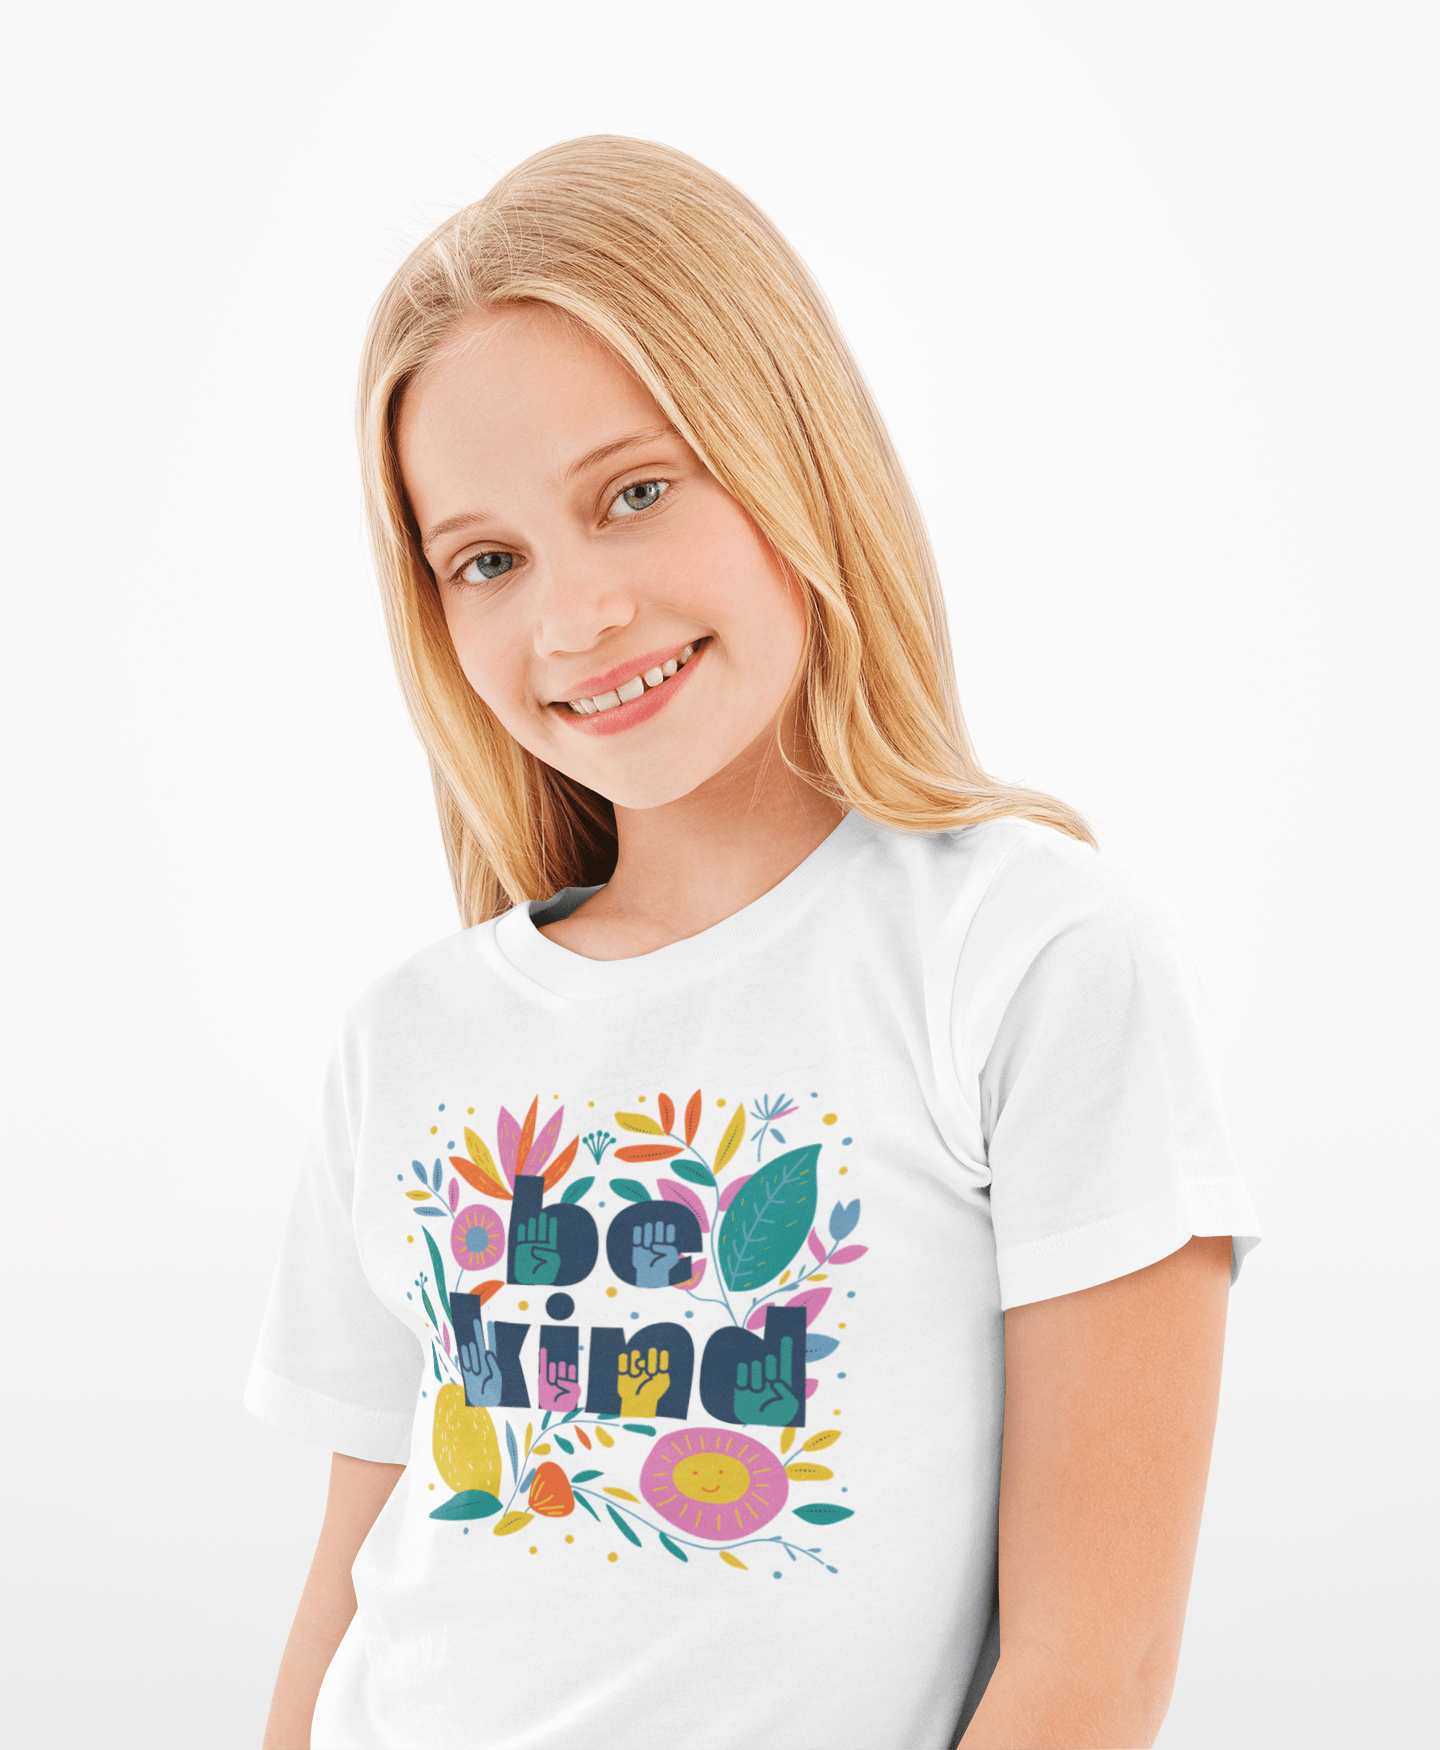 Be Kind Floral Youth Unisex Fit Tee - The Kindness Cause